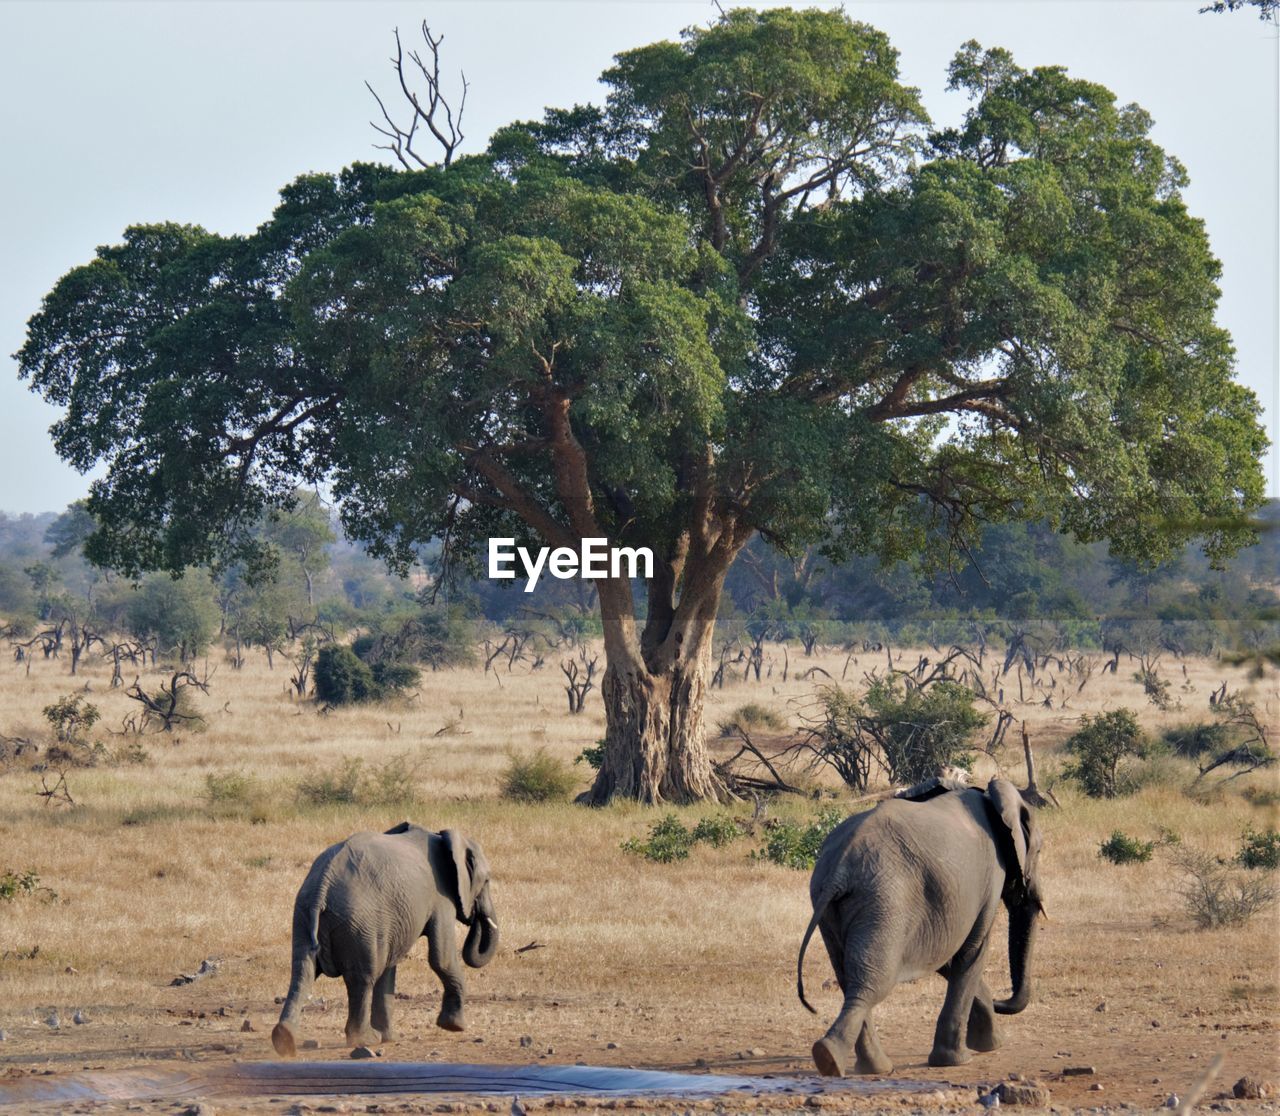 Rear view of elephant calves on land